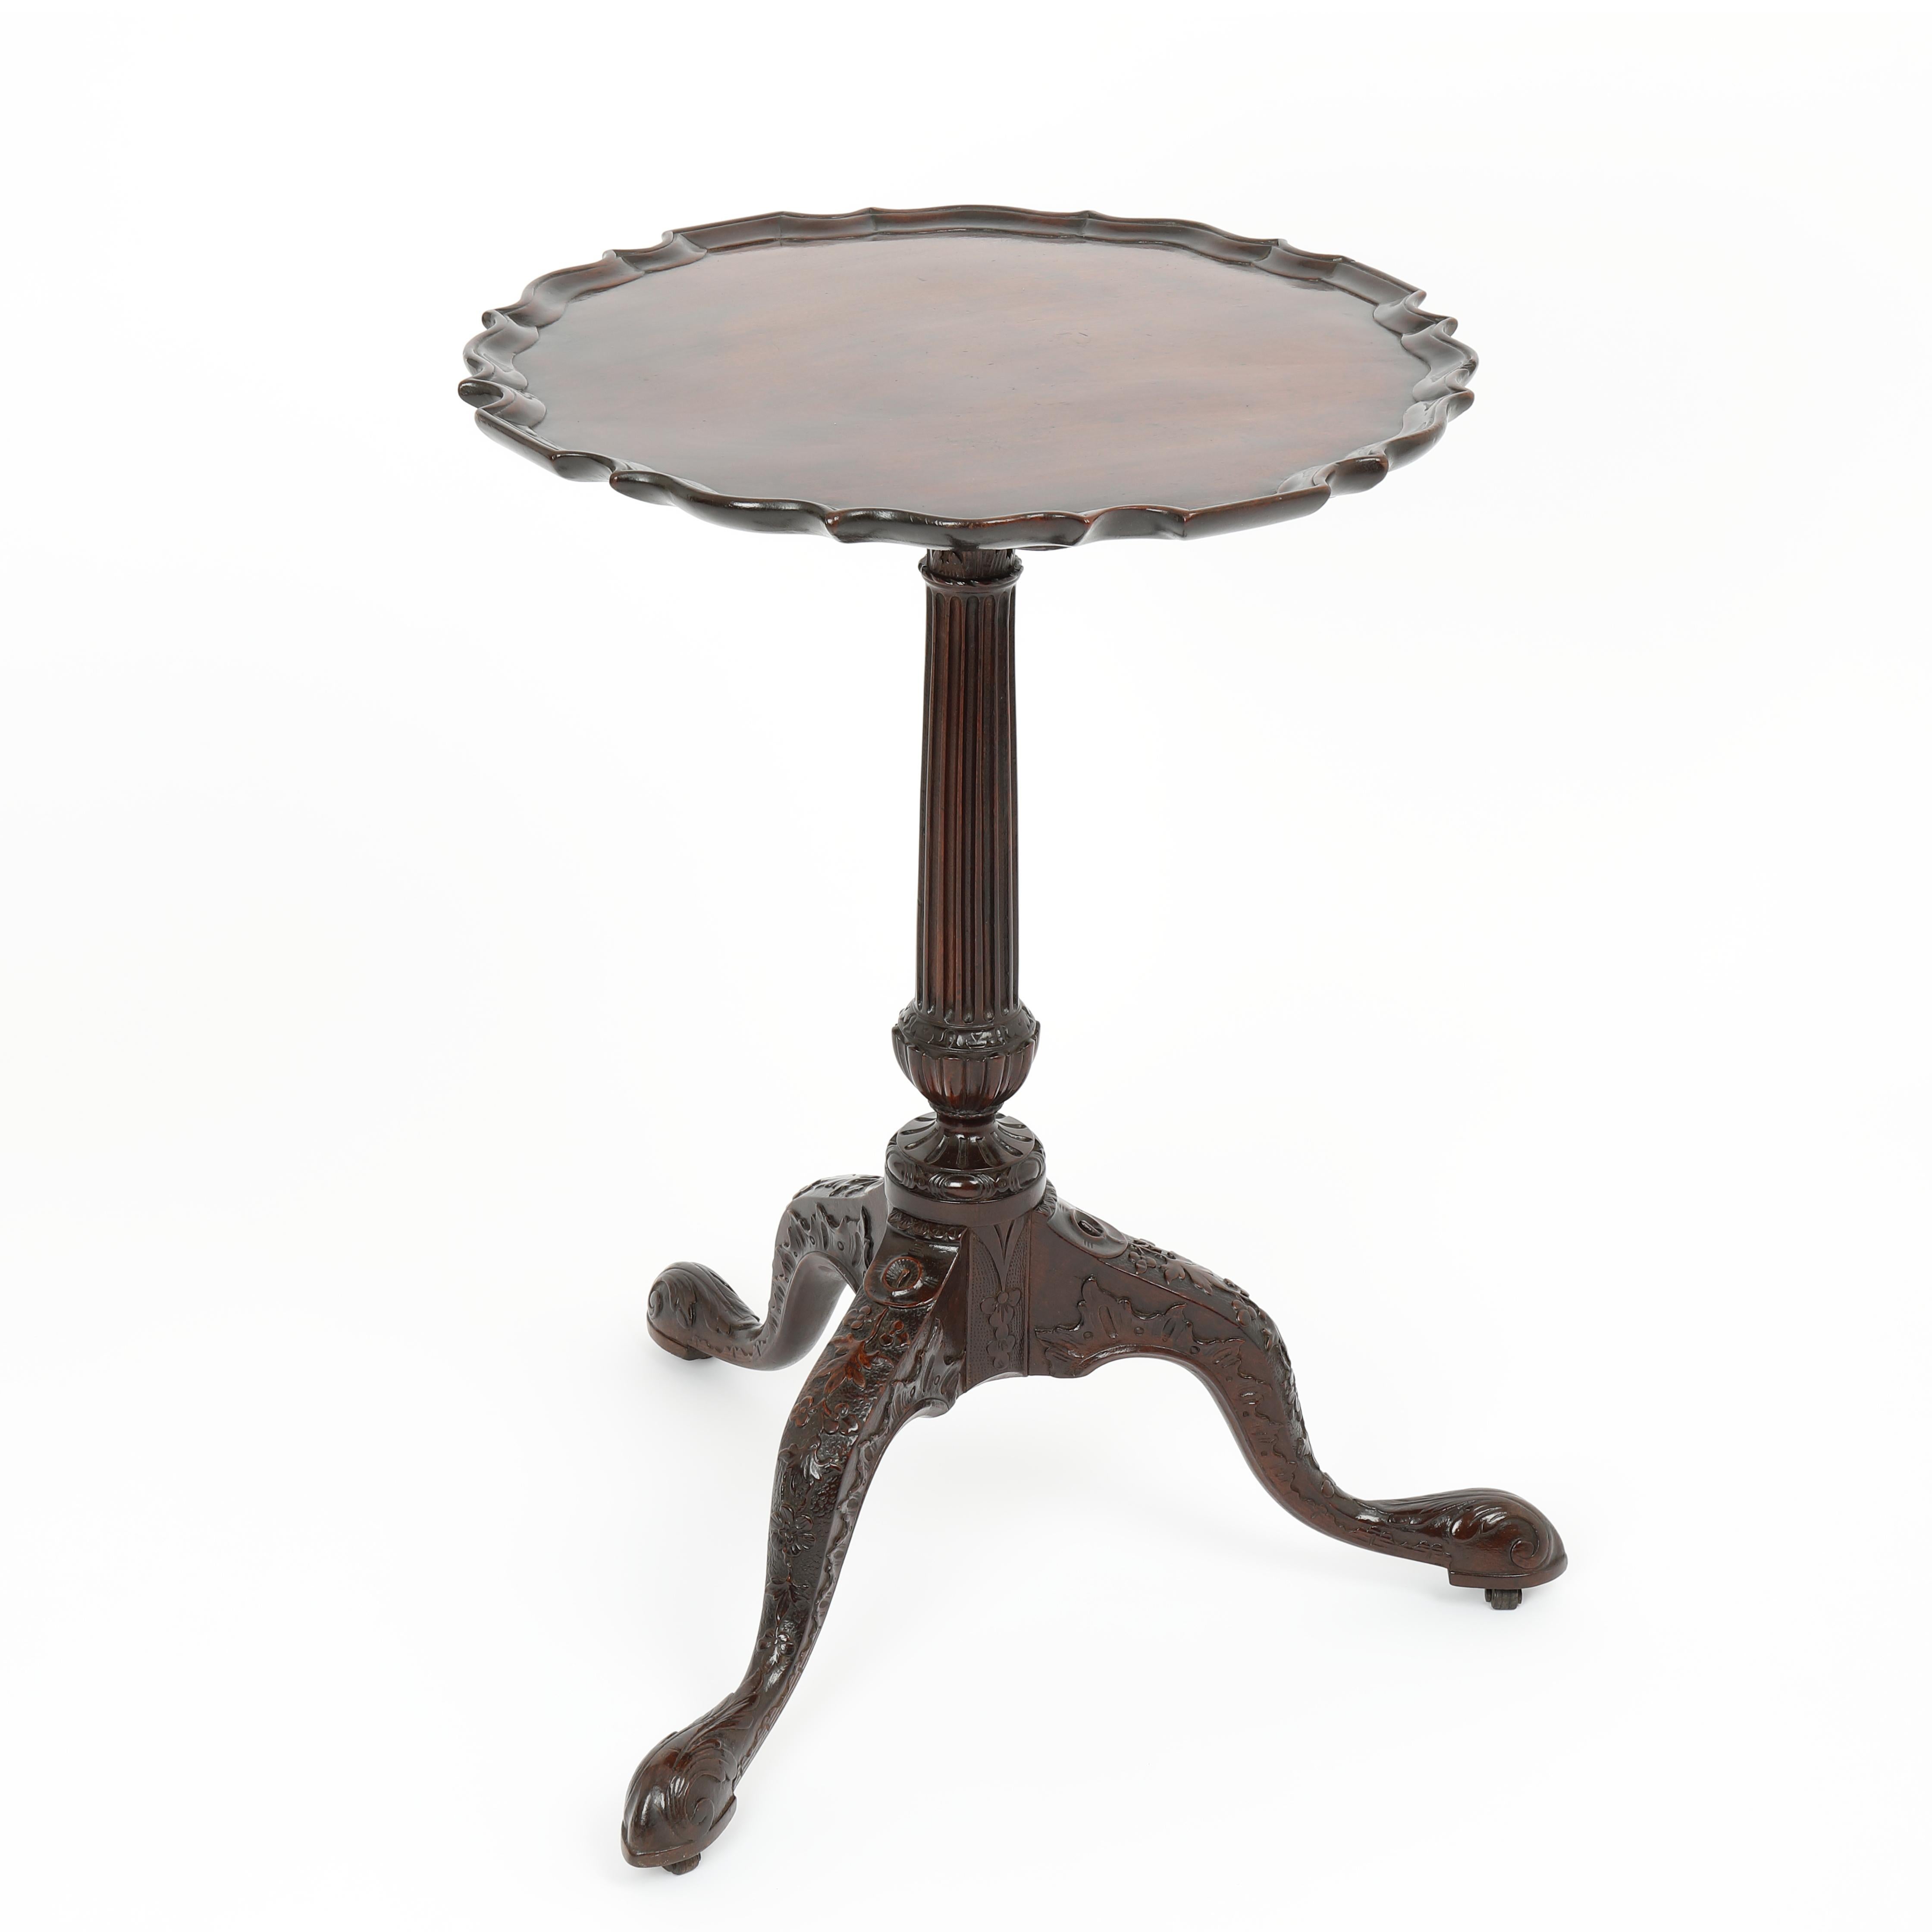 Chippendale Period Mahogany 'Pie-Crust' Tripod Table For Sale 11